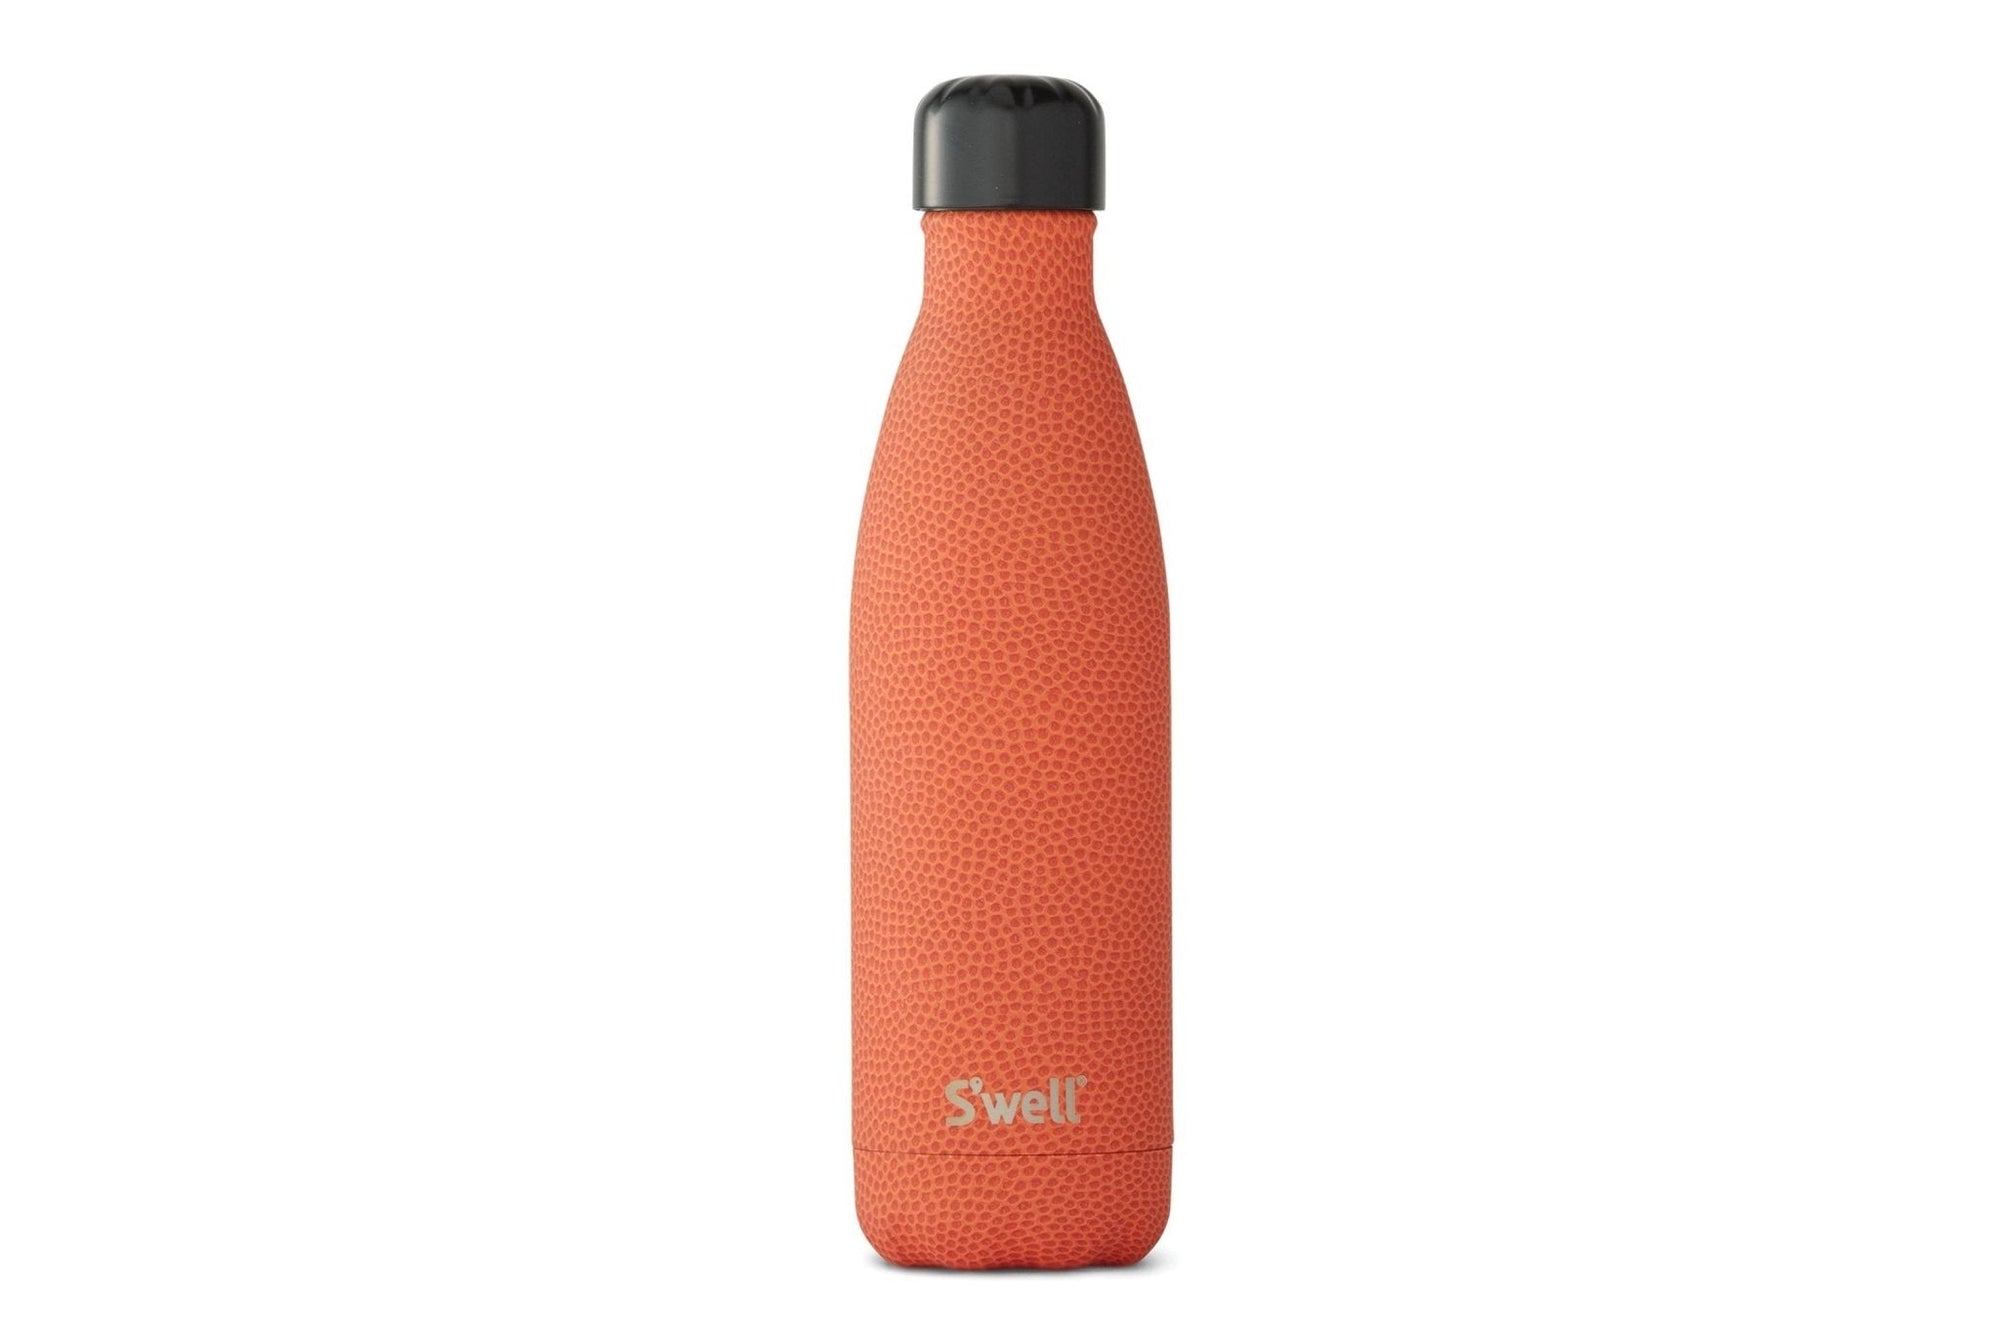 Swell-Stainless-Steel-Water-Bottle-Basketball-17-oz